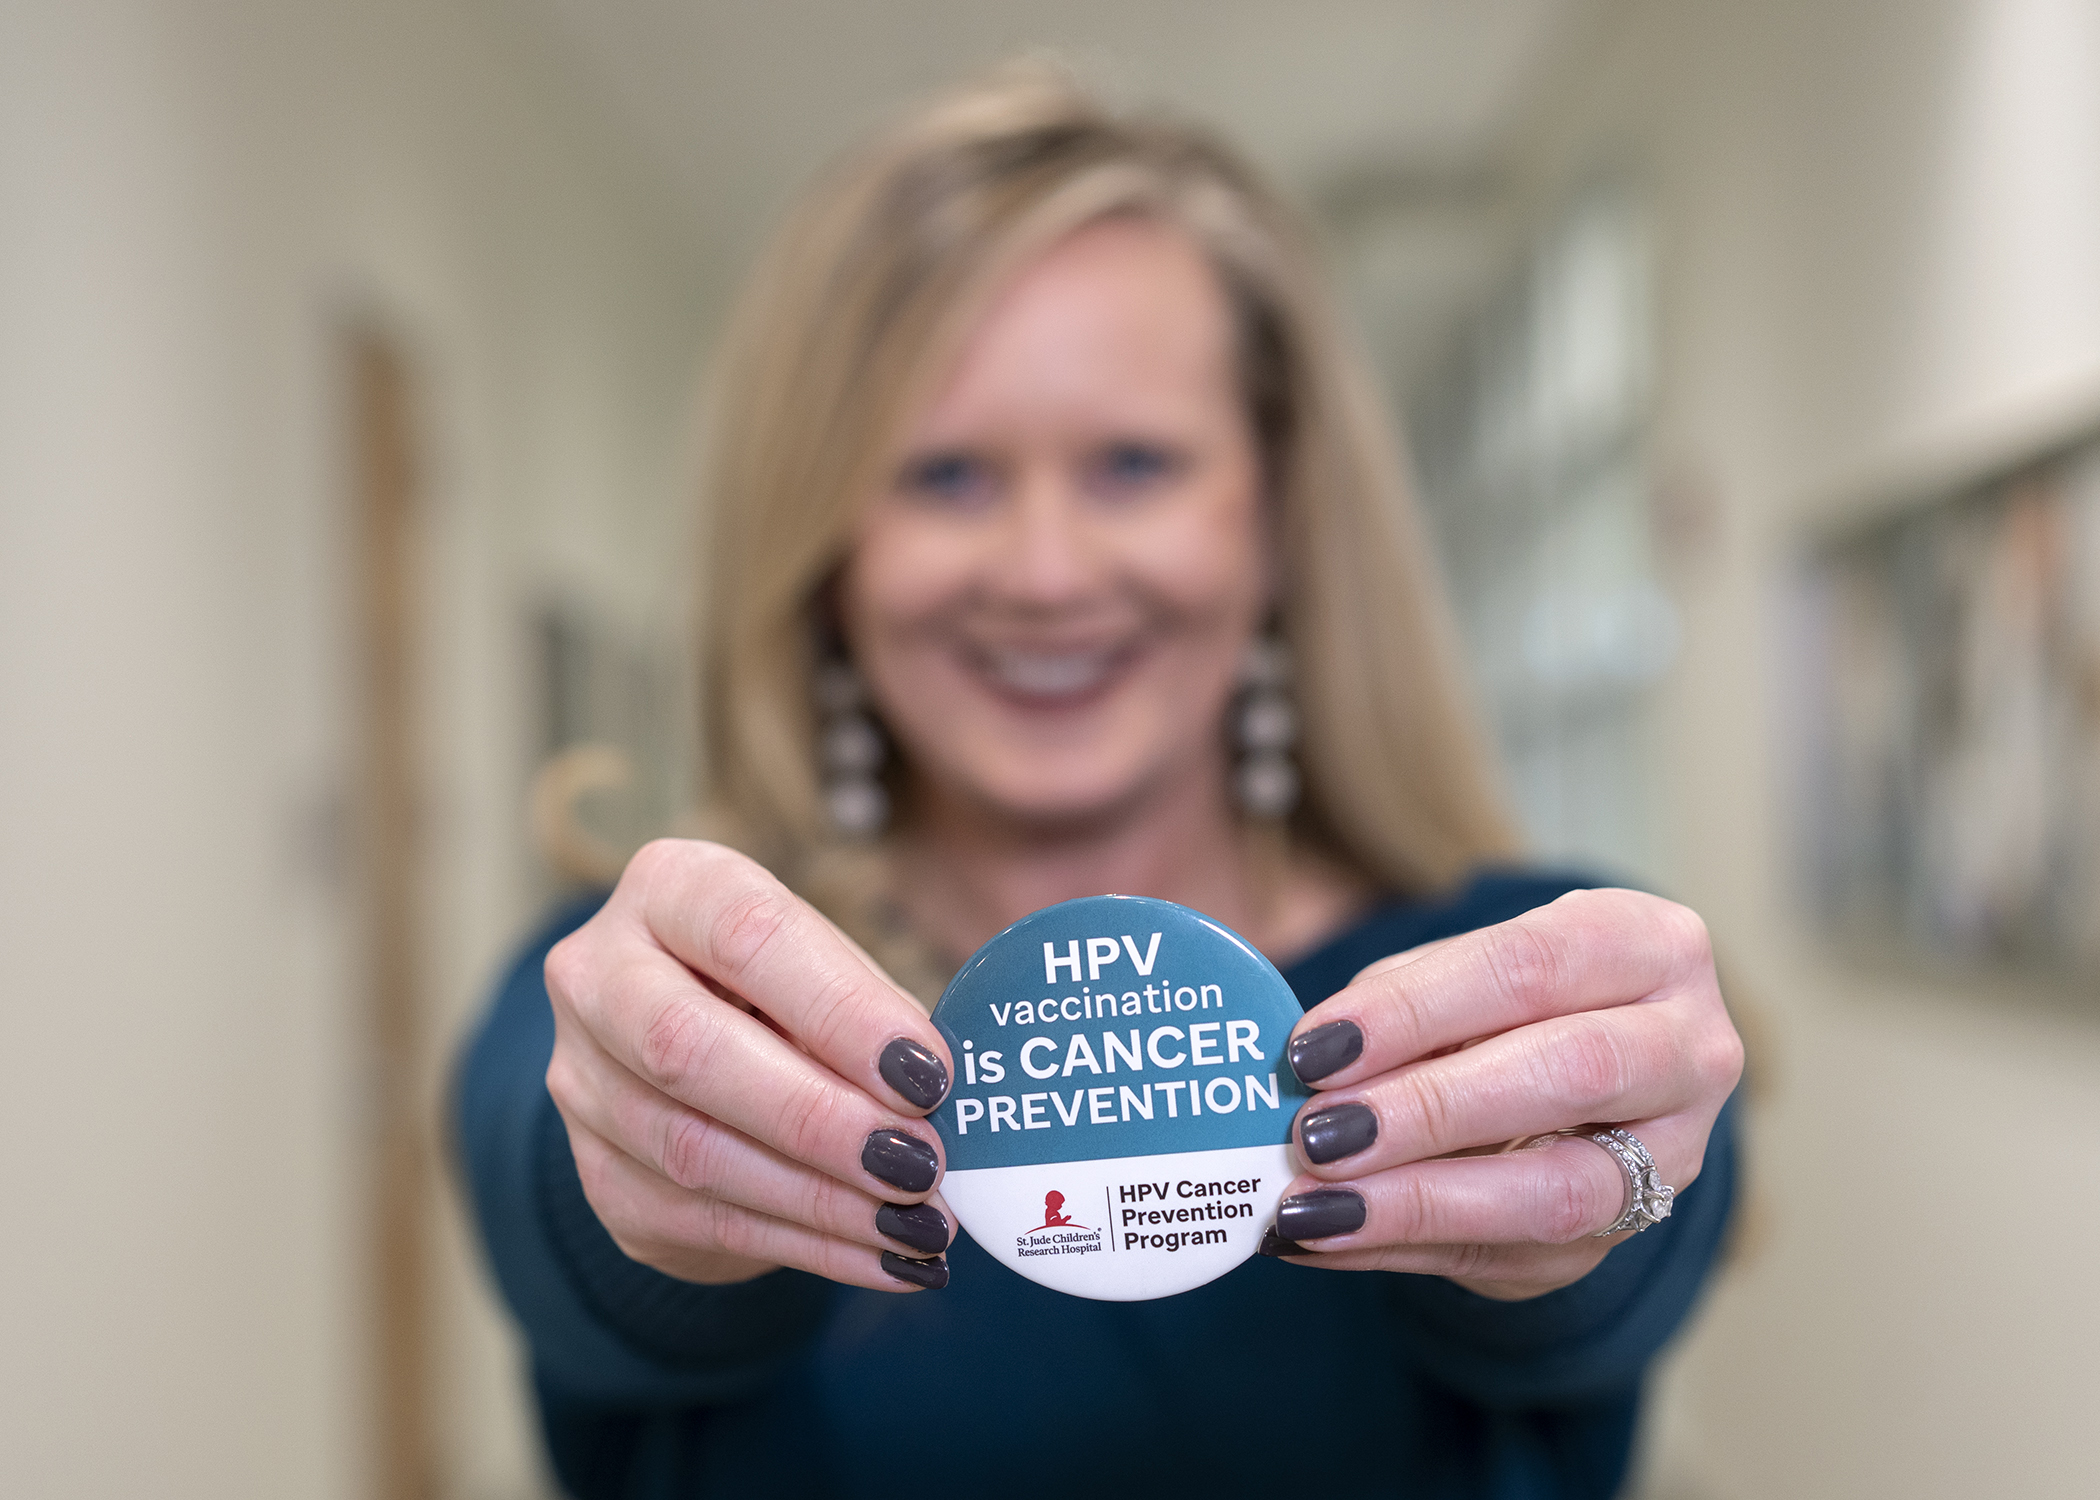 Heather Brandt, Ph.D., is director of the St. Jude HPV Cancer Prevention Program.